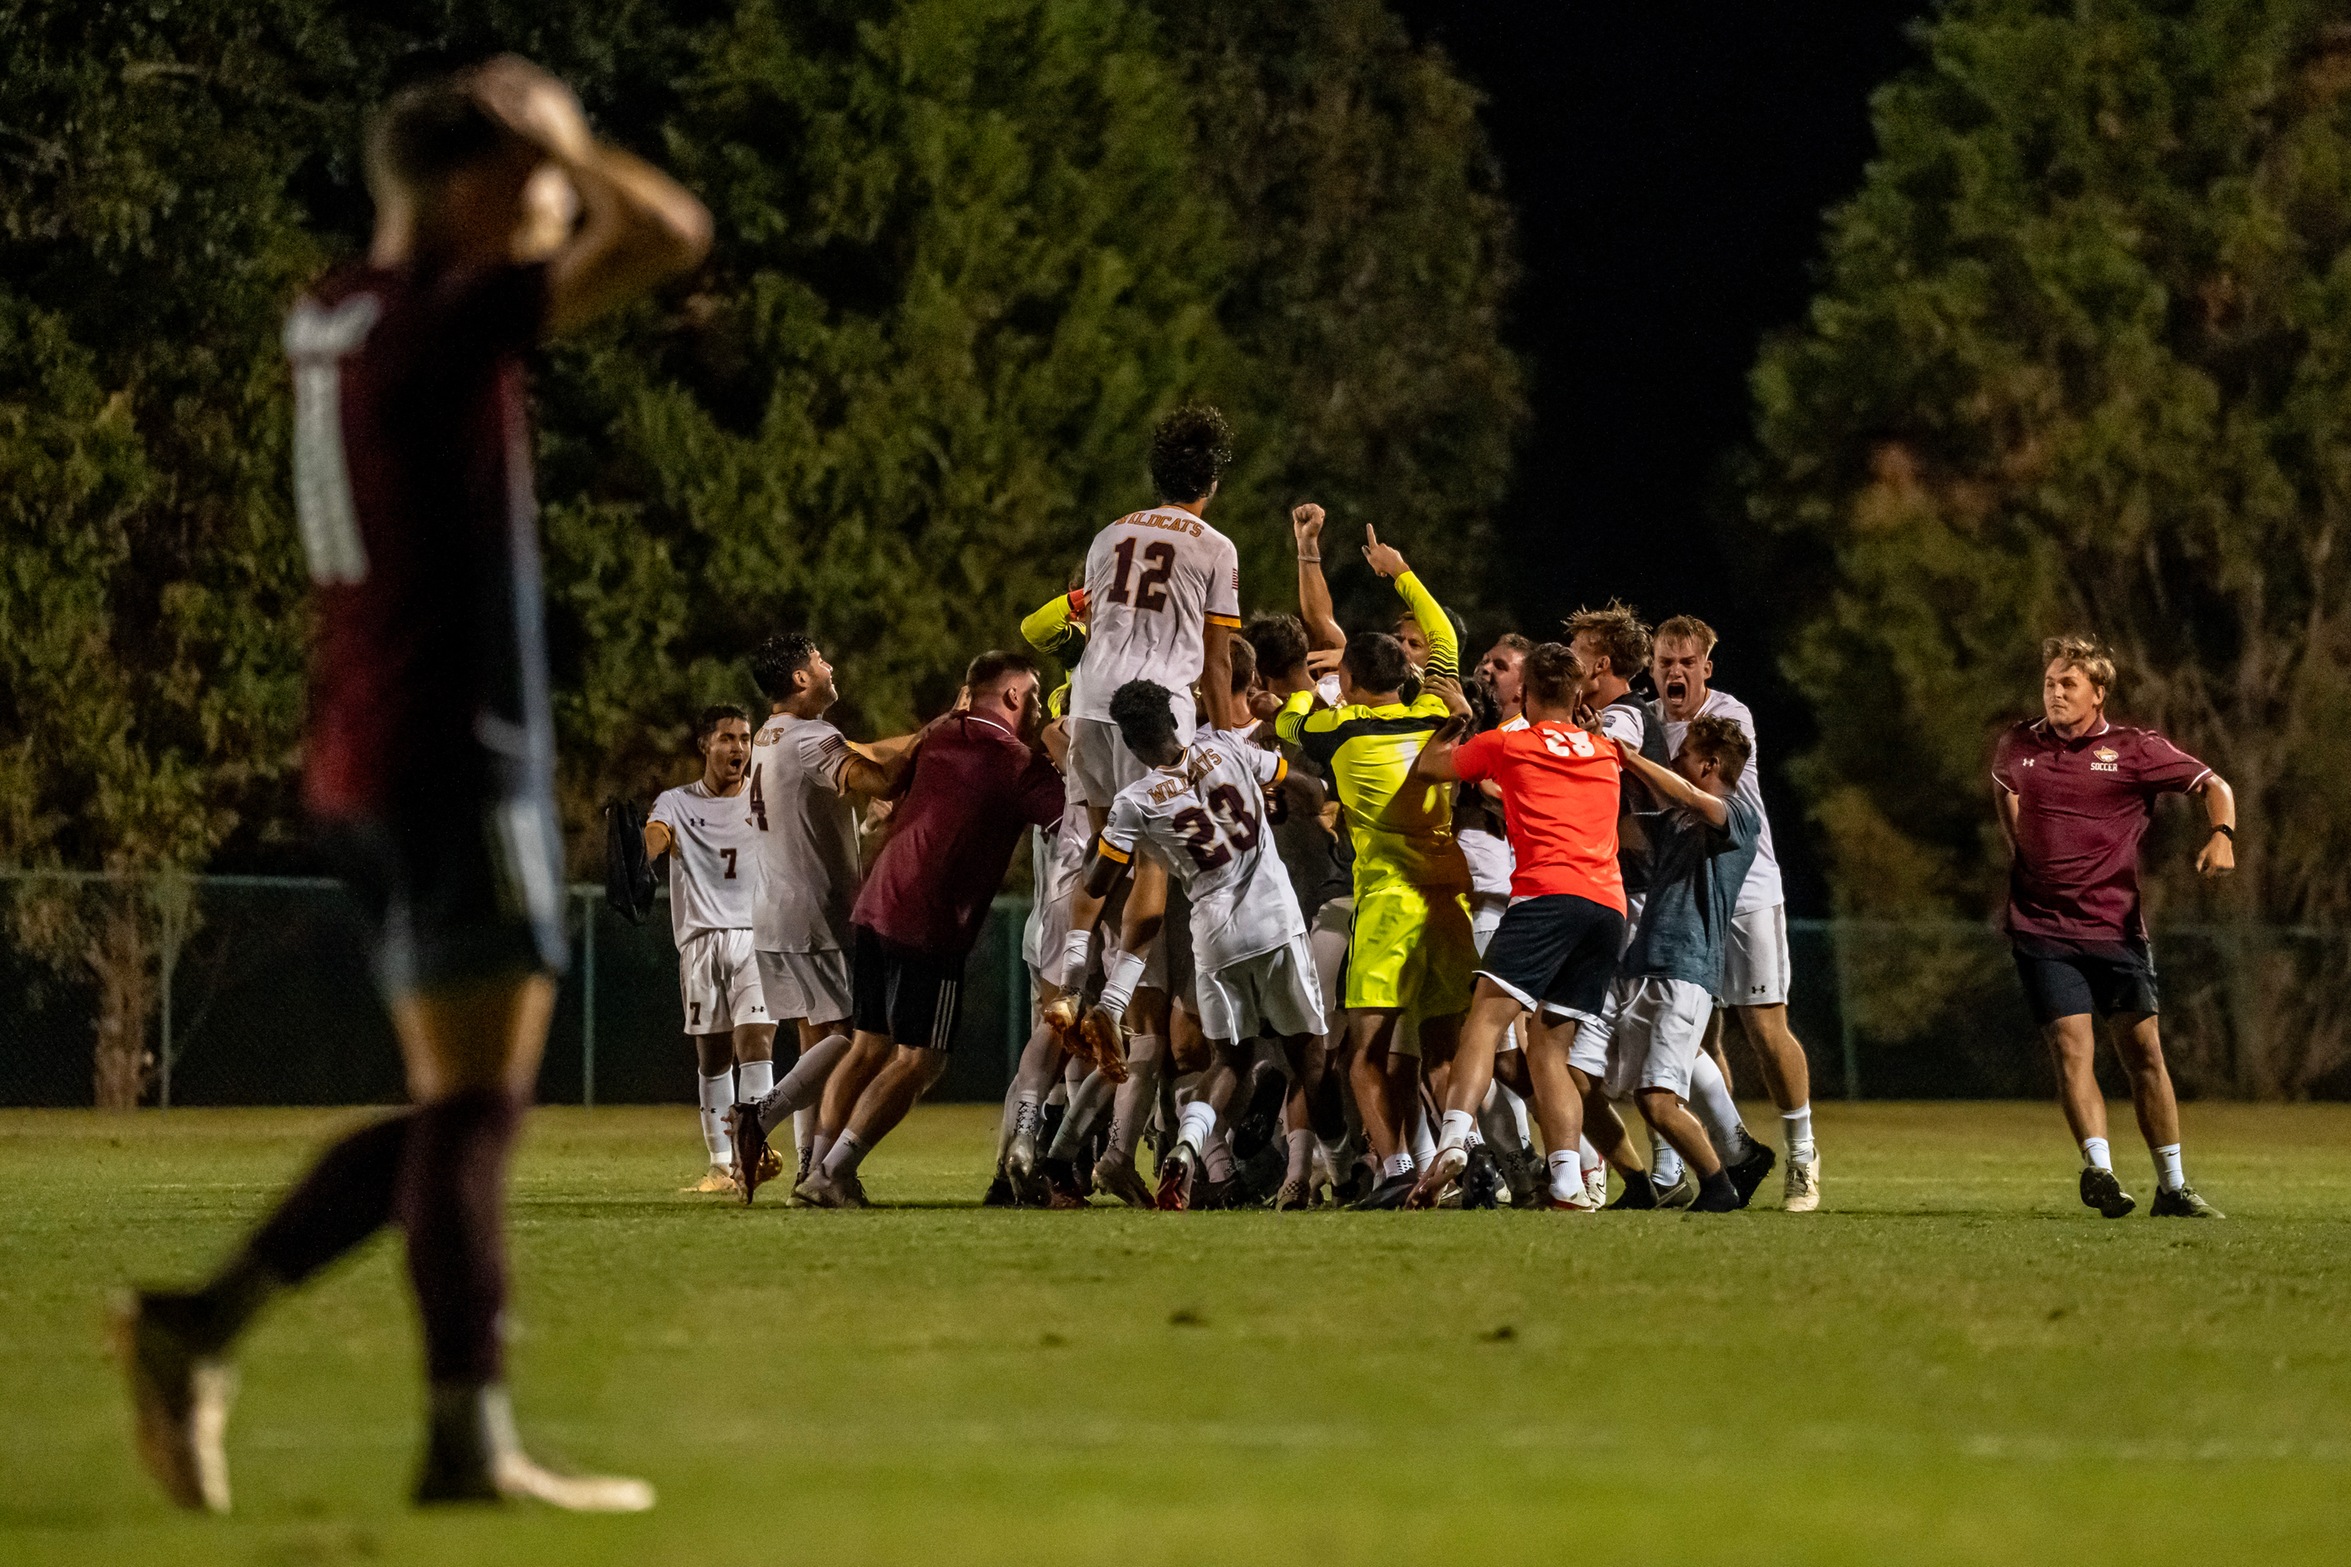 Dommer's golden goal sends Pearl River to Gulf South District Semifinals